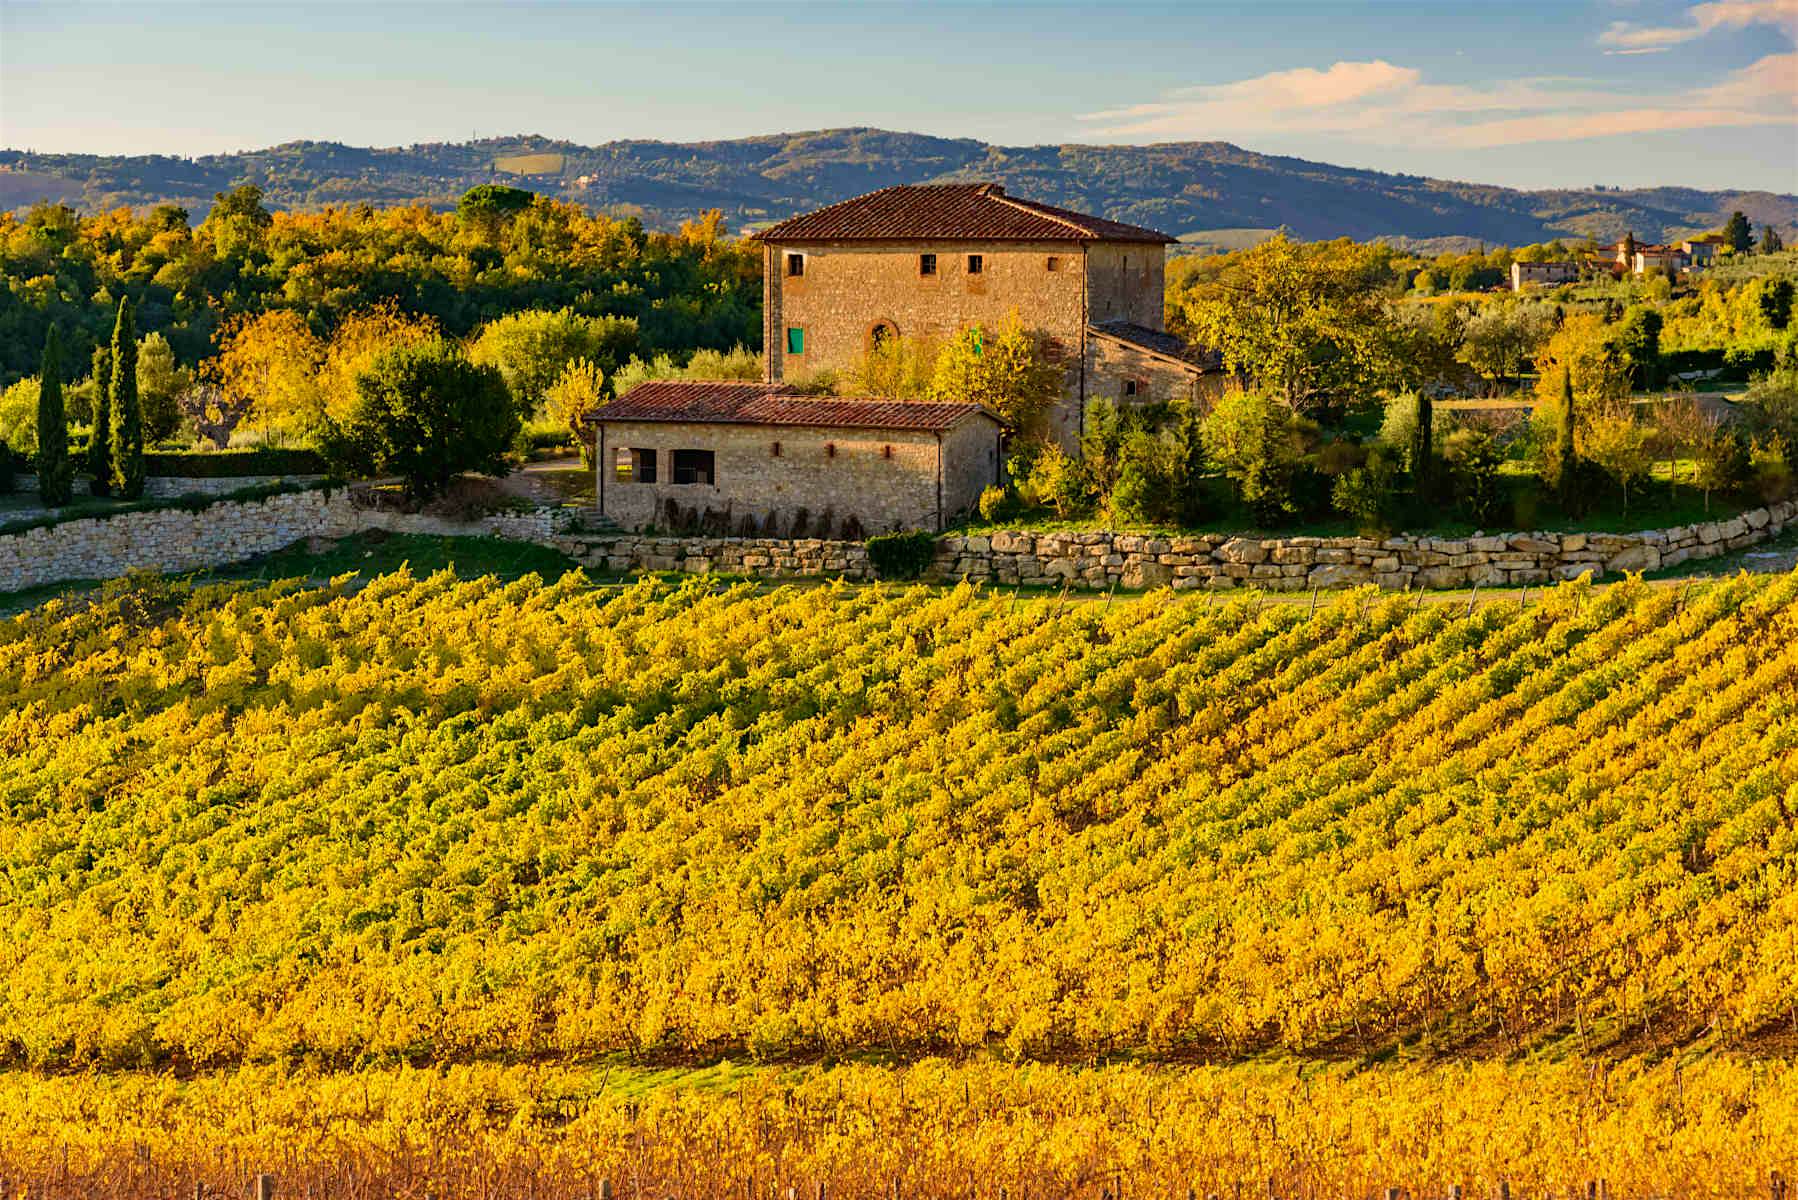 These are the best rural towns in Italy for slow living ...